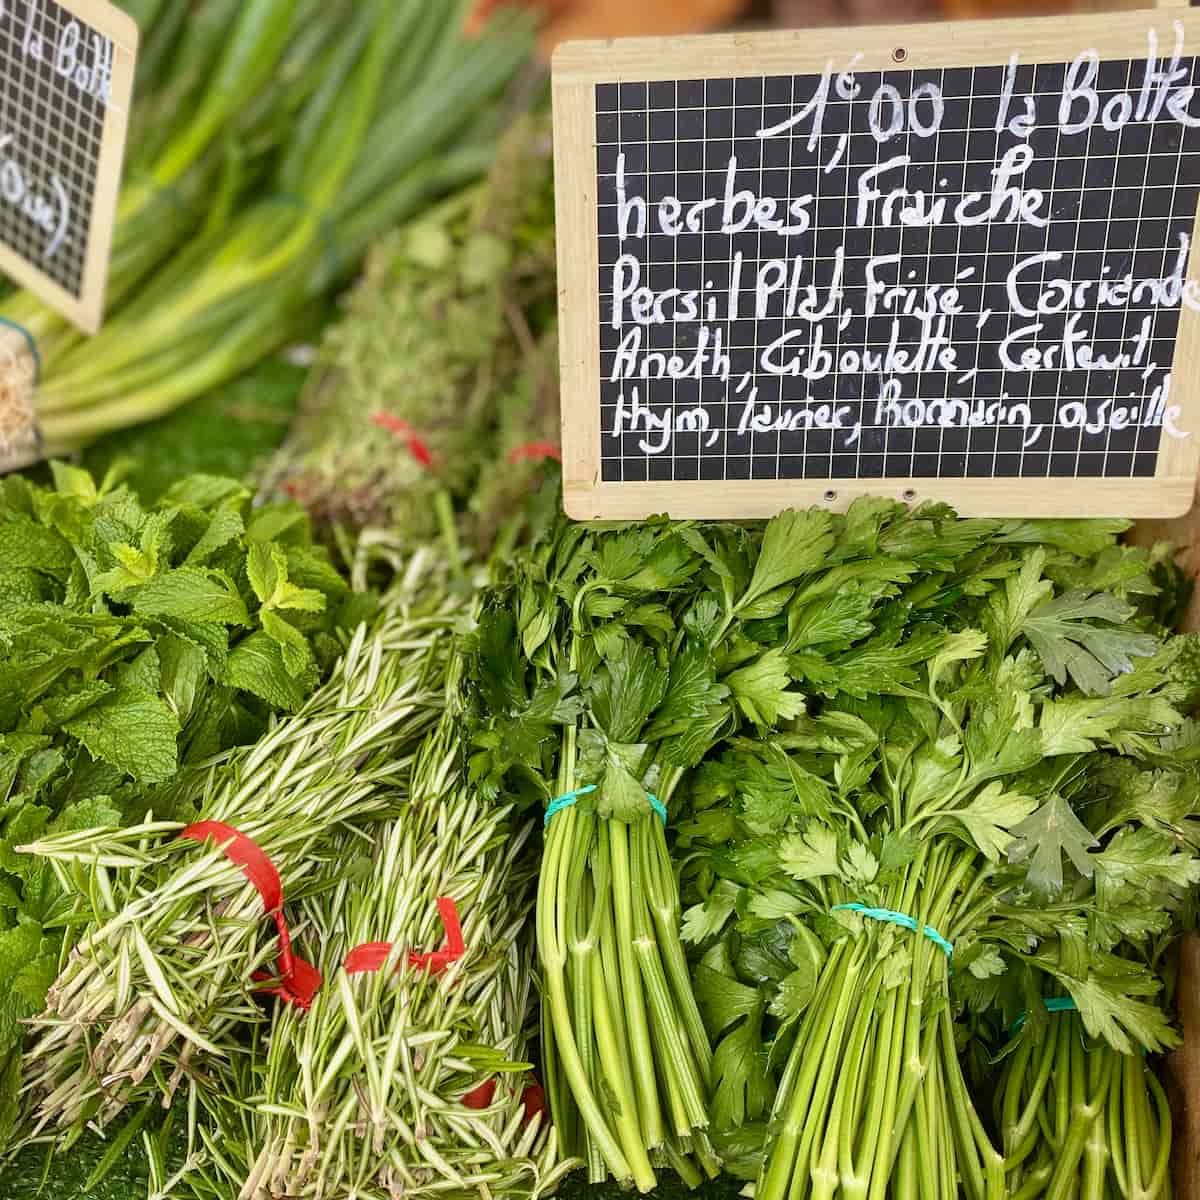 bunches of fresh herbs at the French market (with a sign in French saying herbes fraiches)